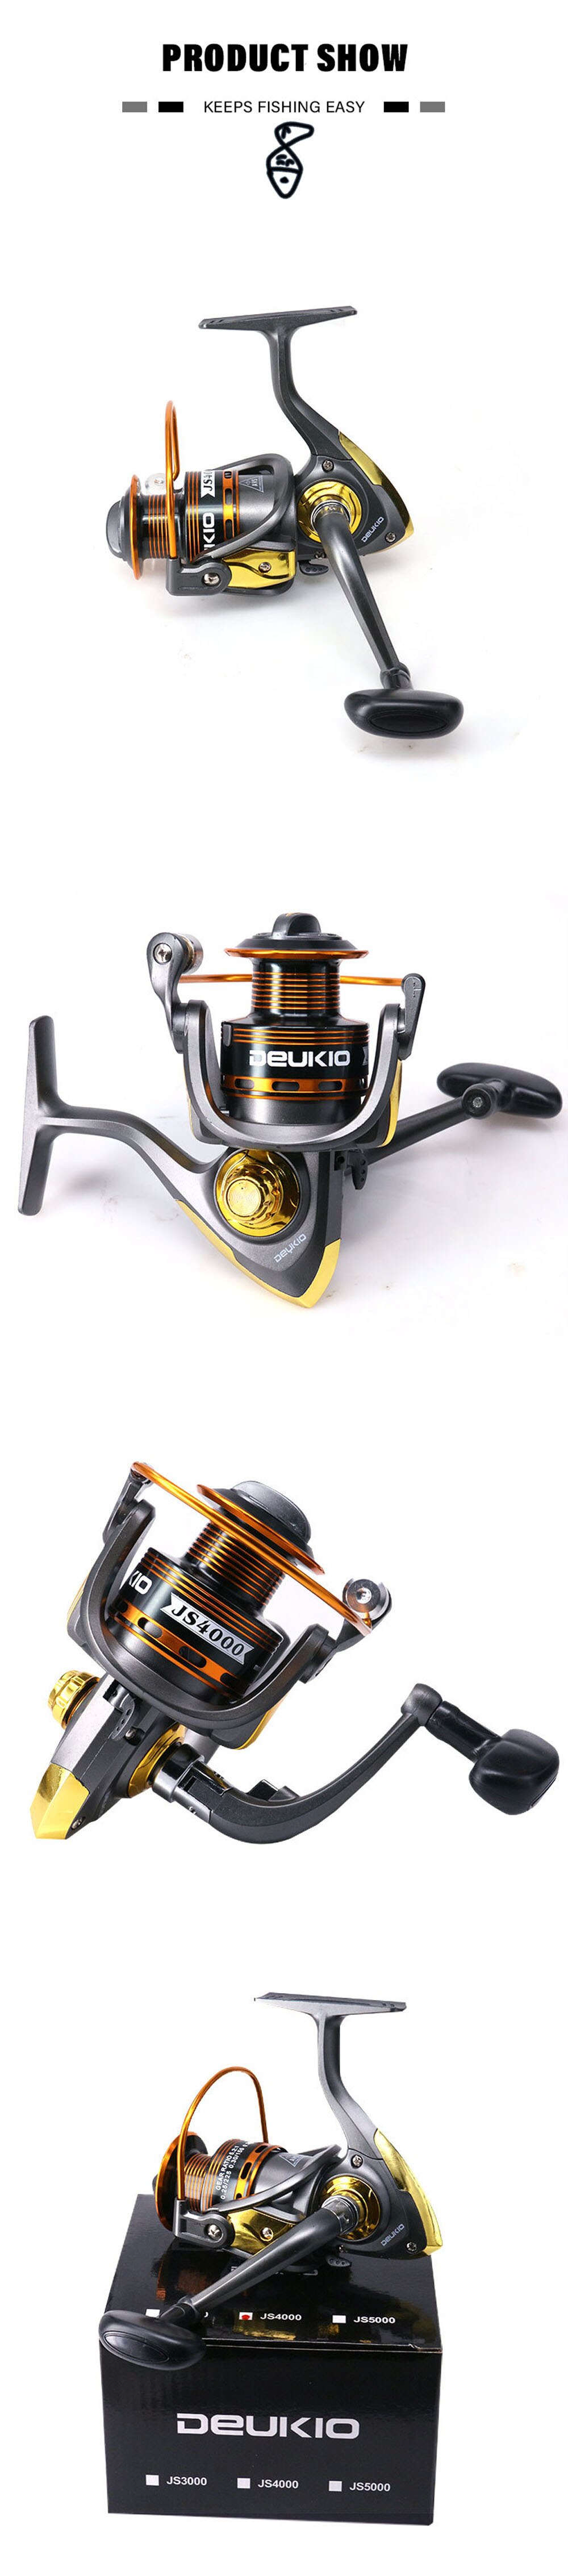 Spinning-Reels-Light-Weight-Ultra-Smooth-Powerful-Spinning-Fishing-Reels-501-Gear-Ratio-for-Inshore--1005001835451716